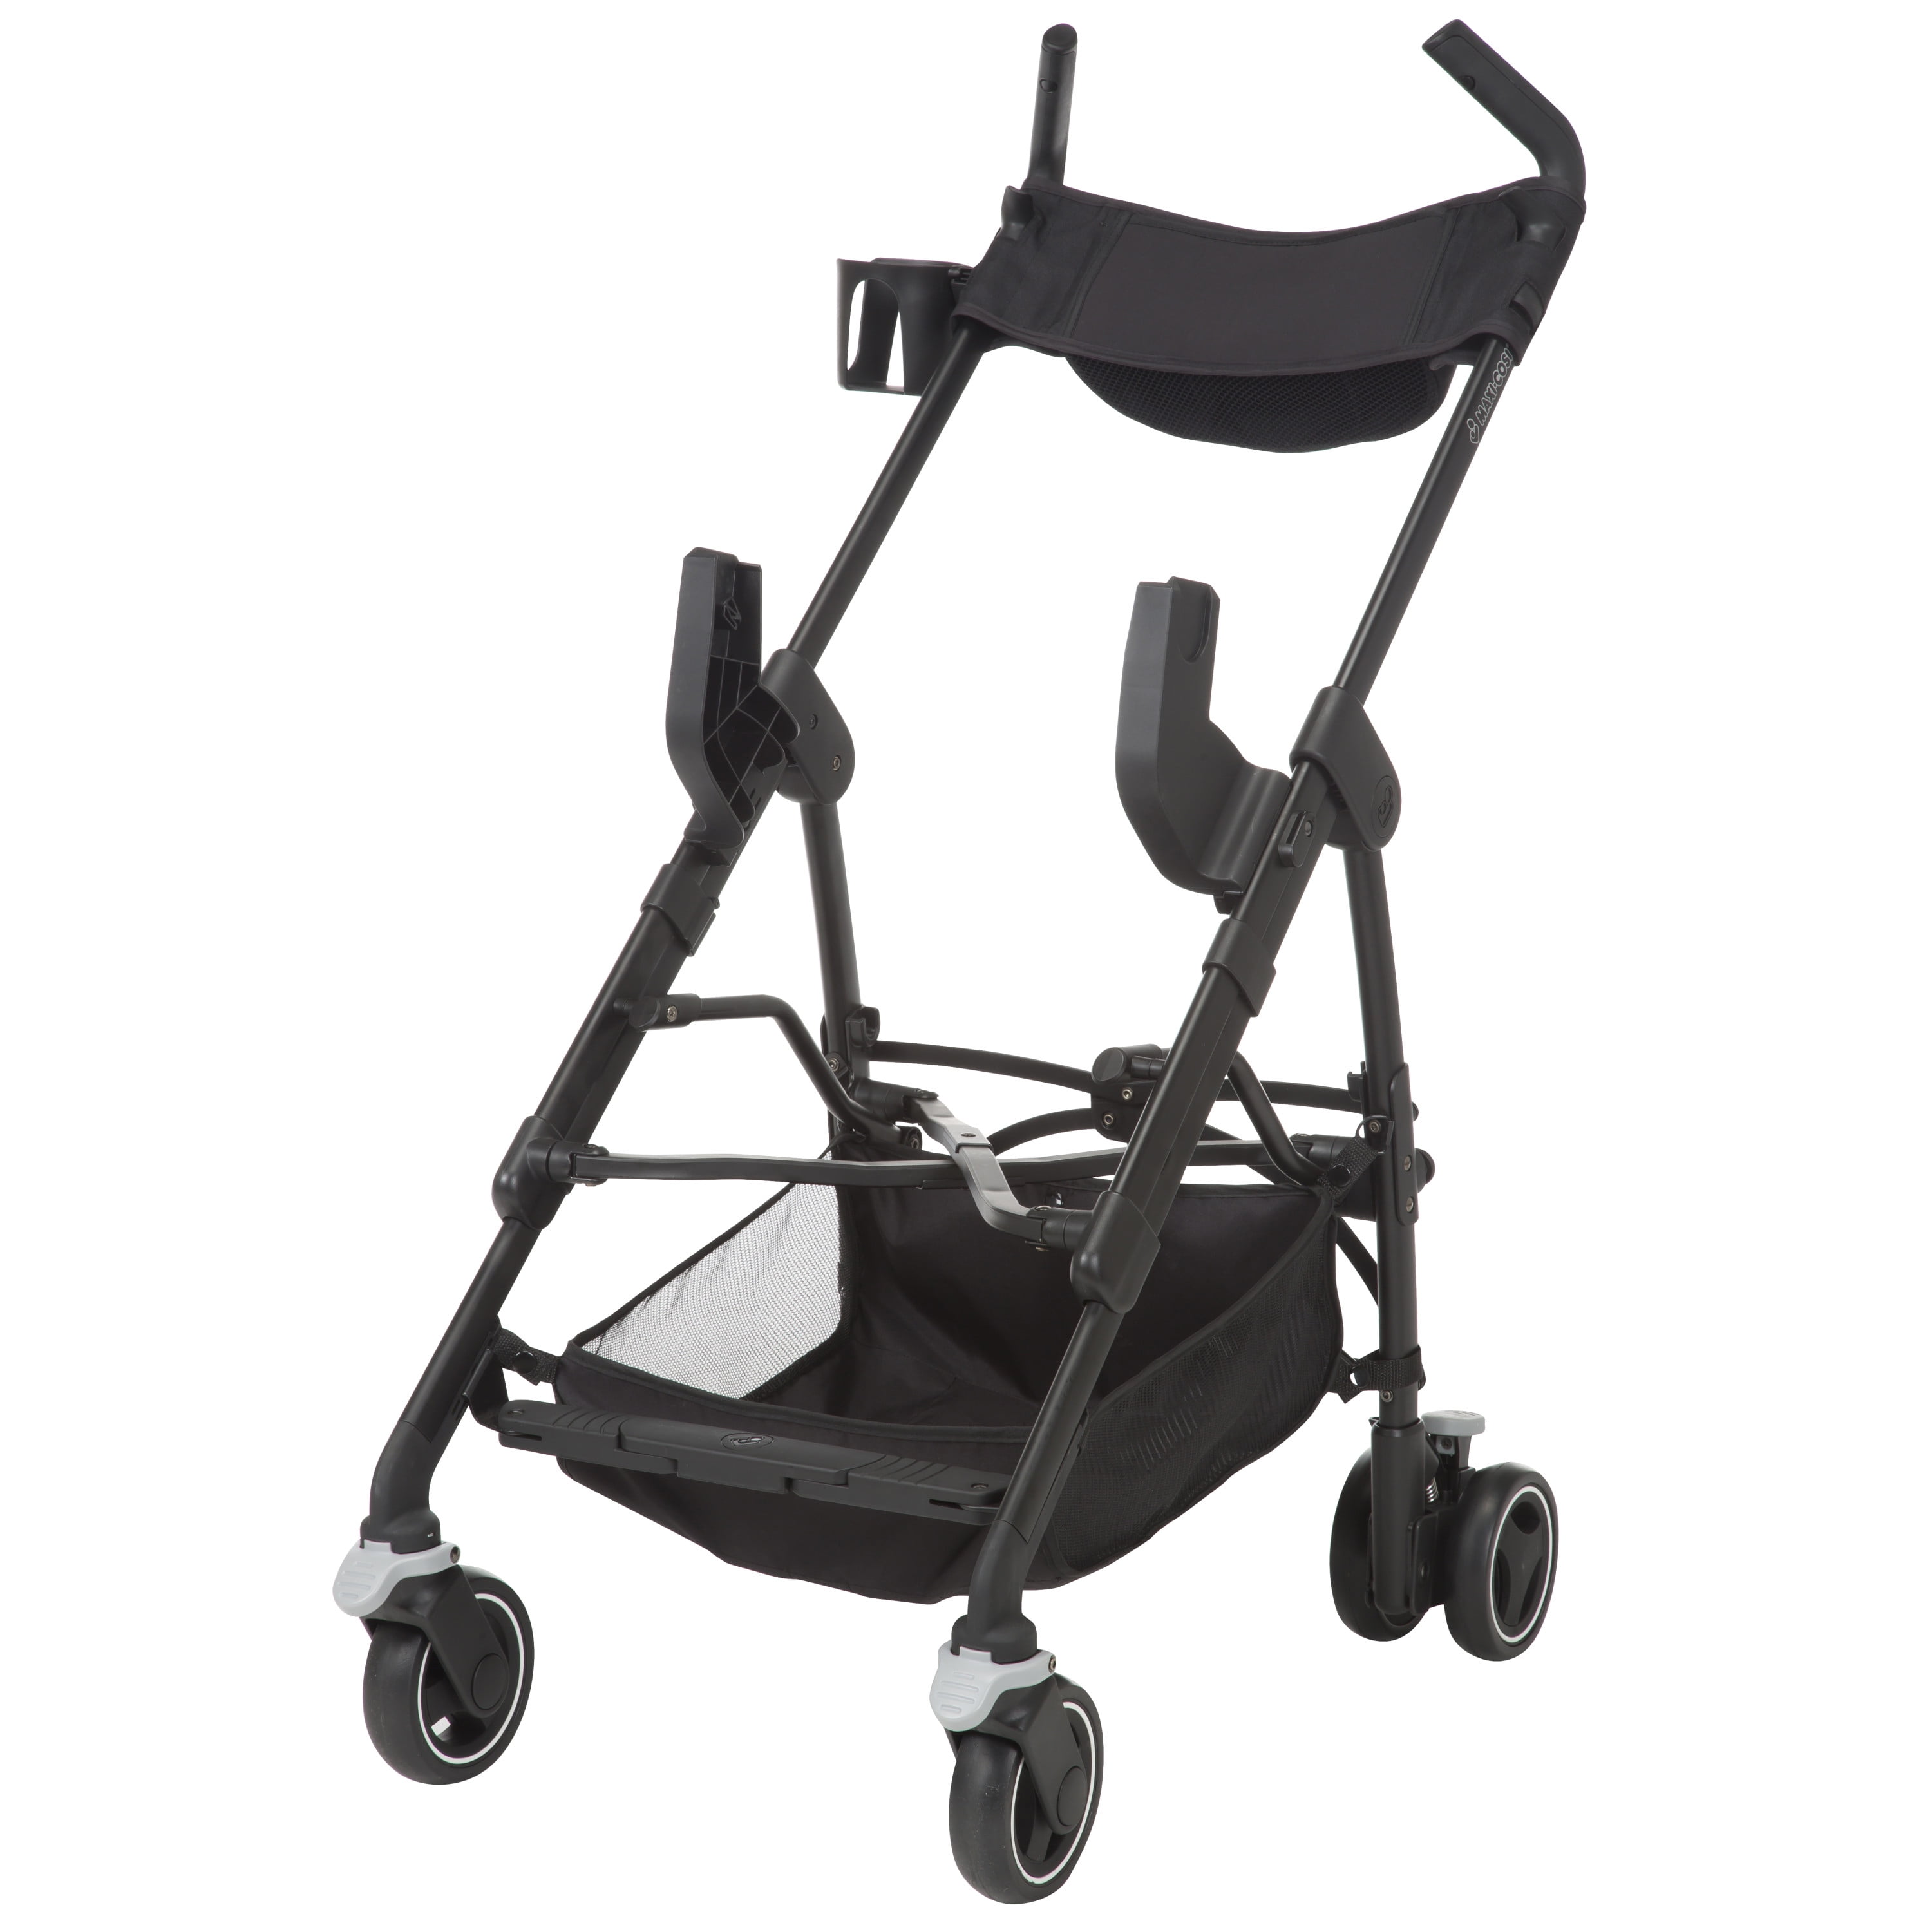 maxi cosi travel system for sale